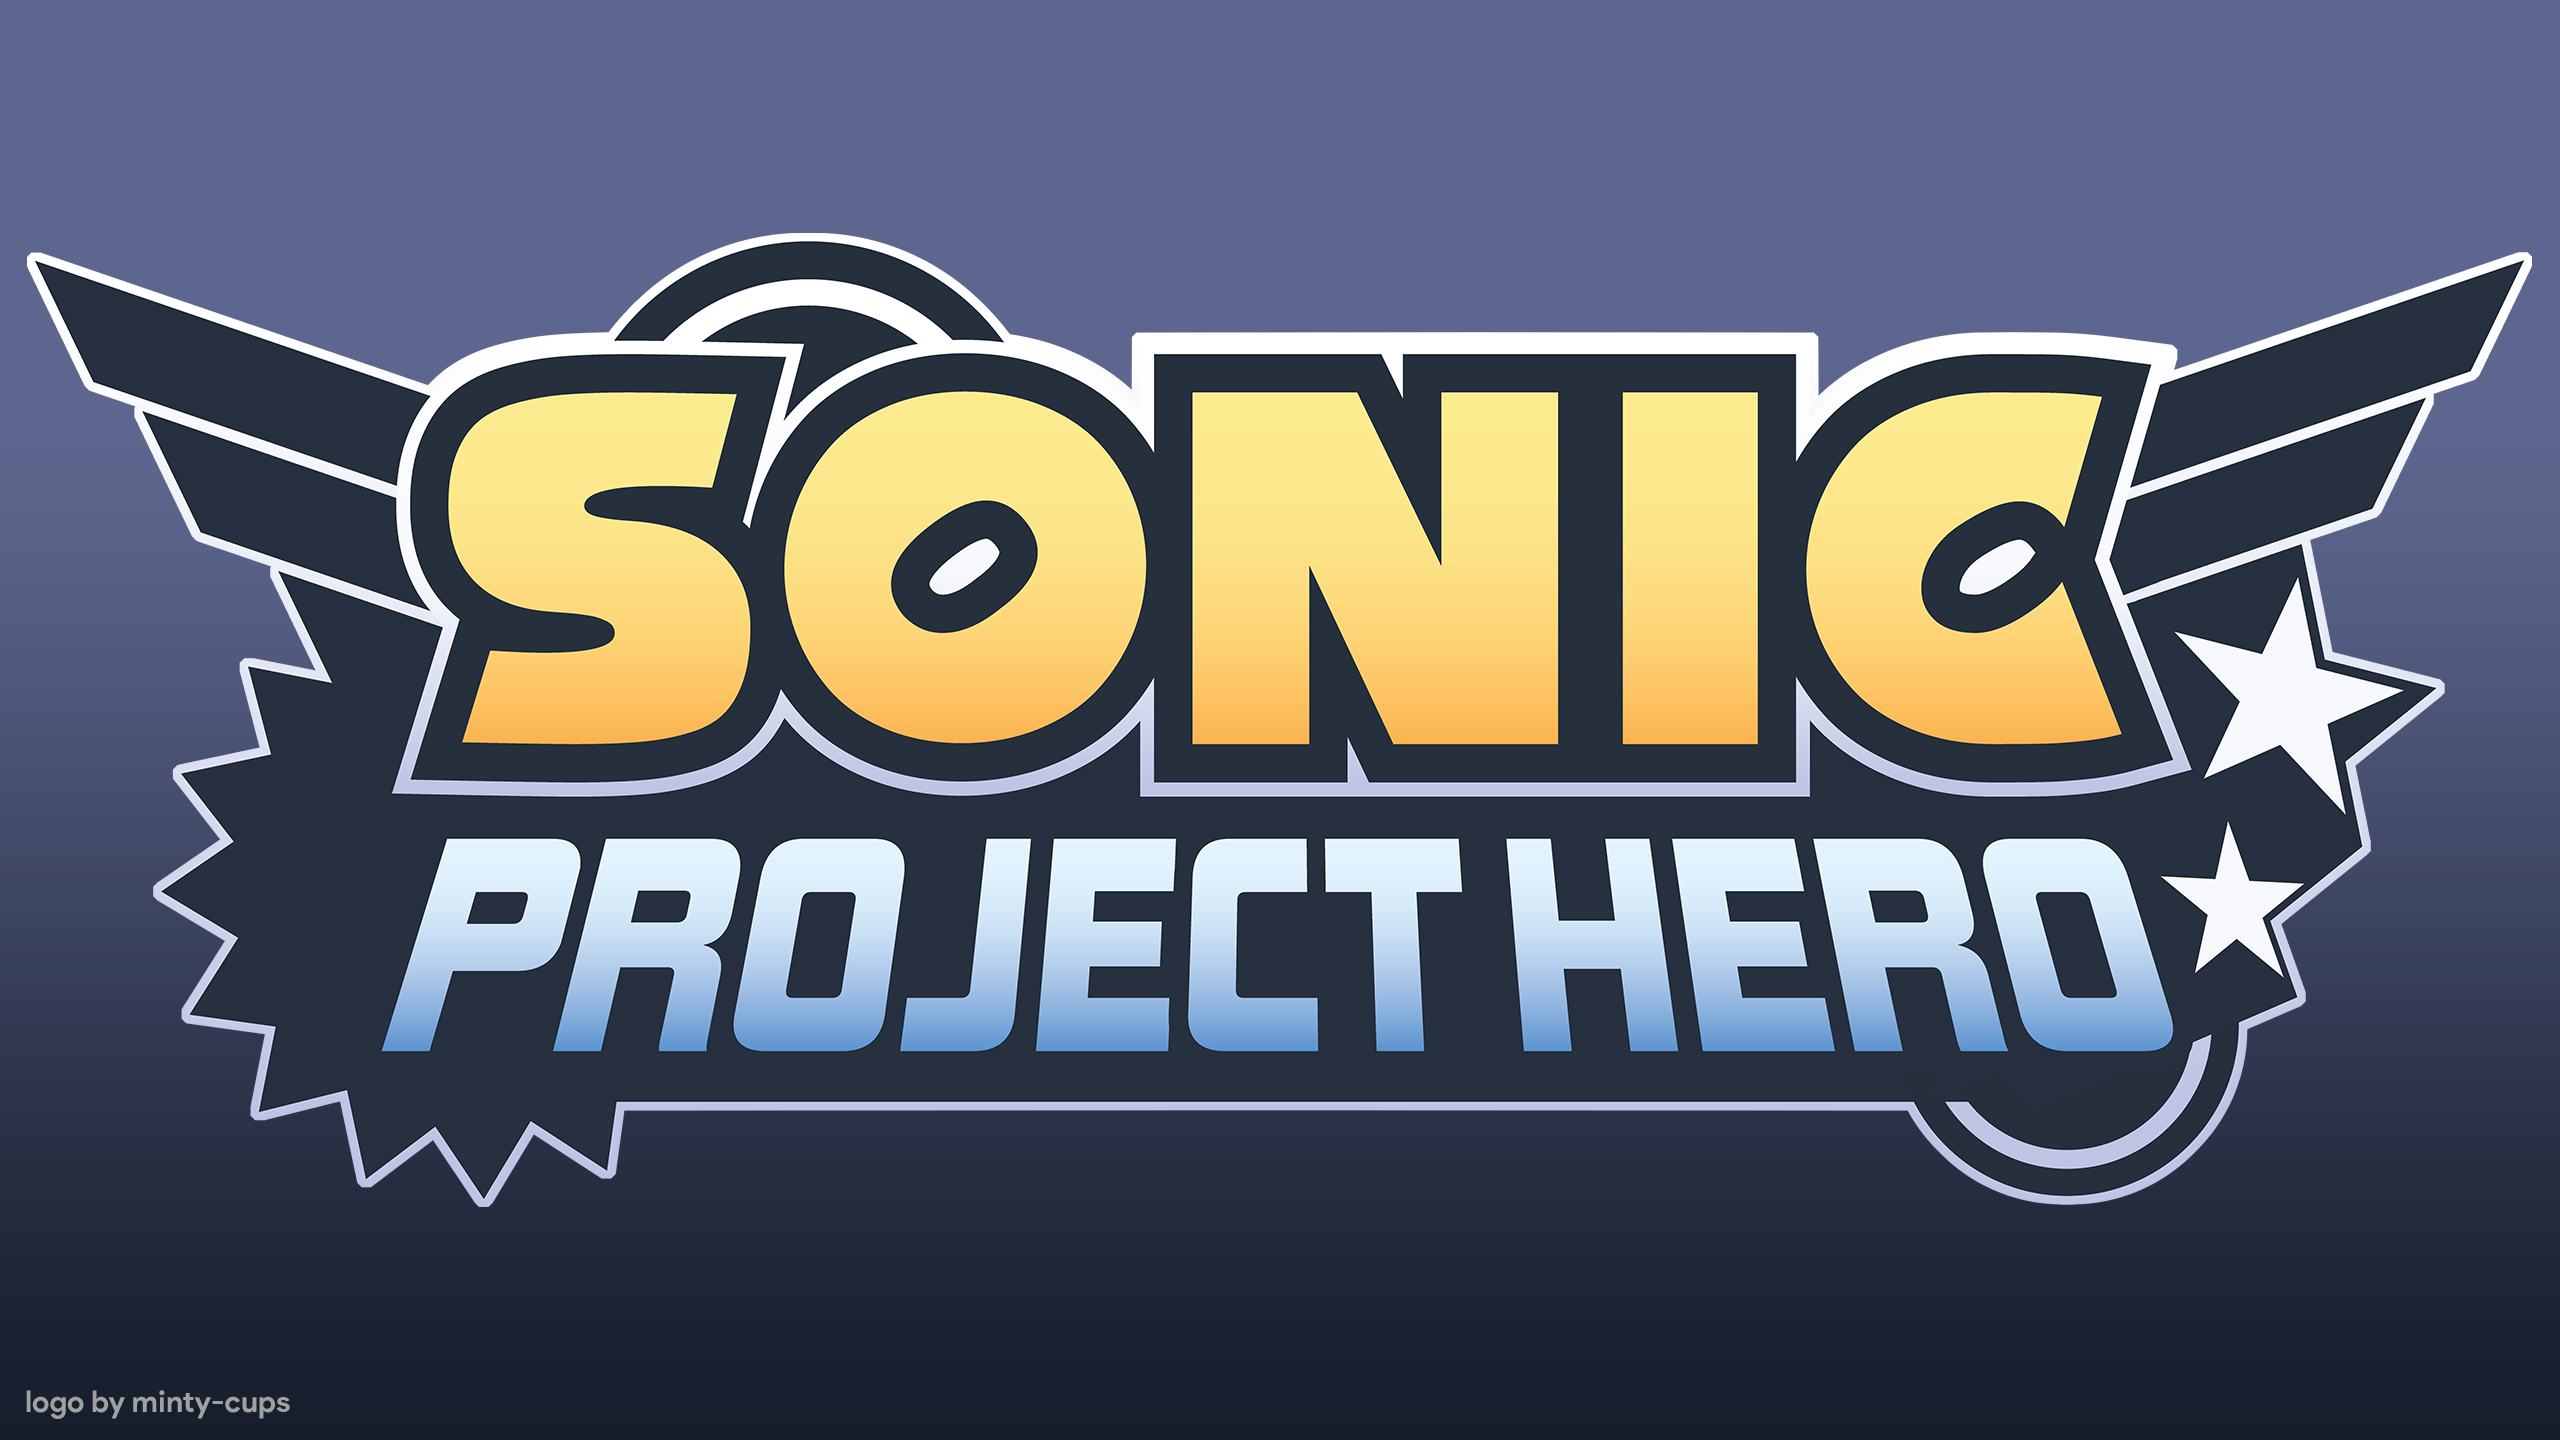 PC / Computer - Sonic Classic - Sonic The Hedgehog - The Spriters Resource